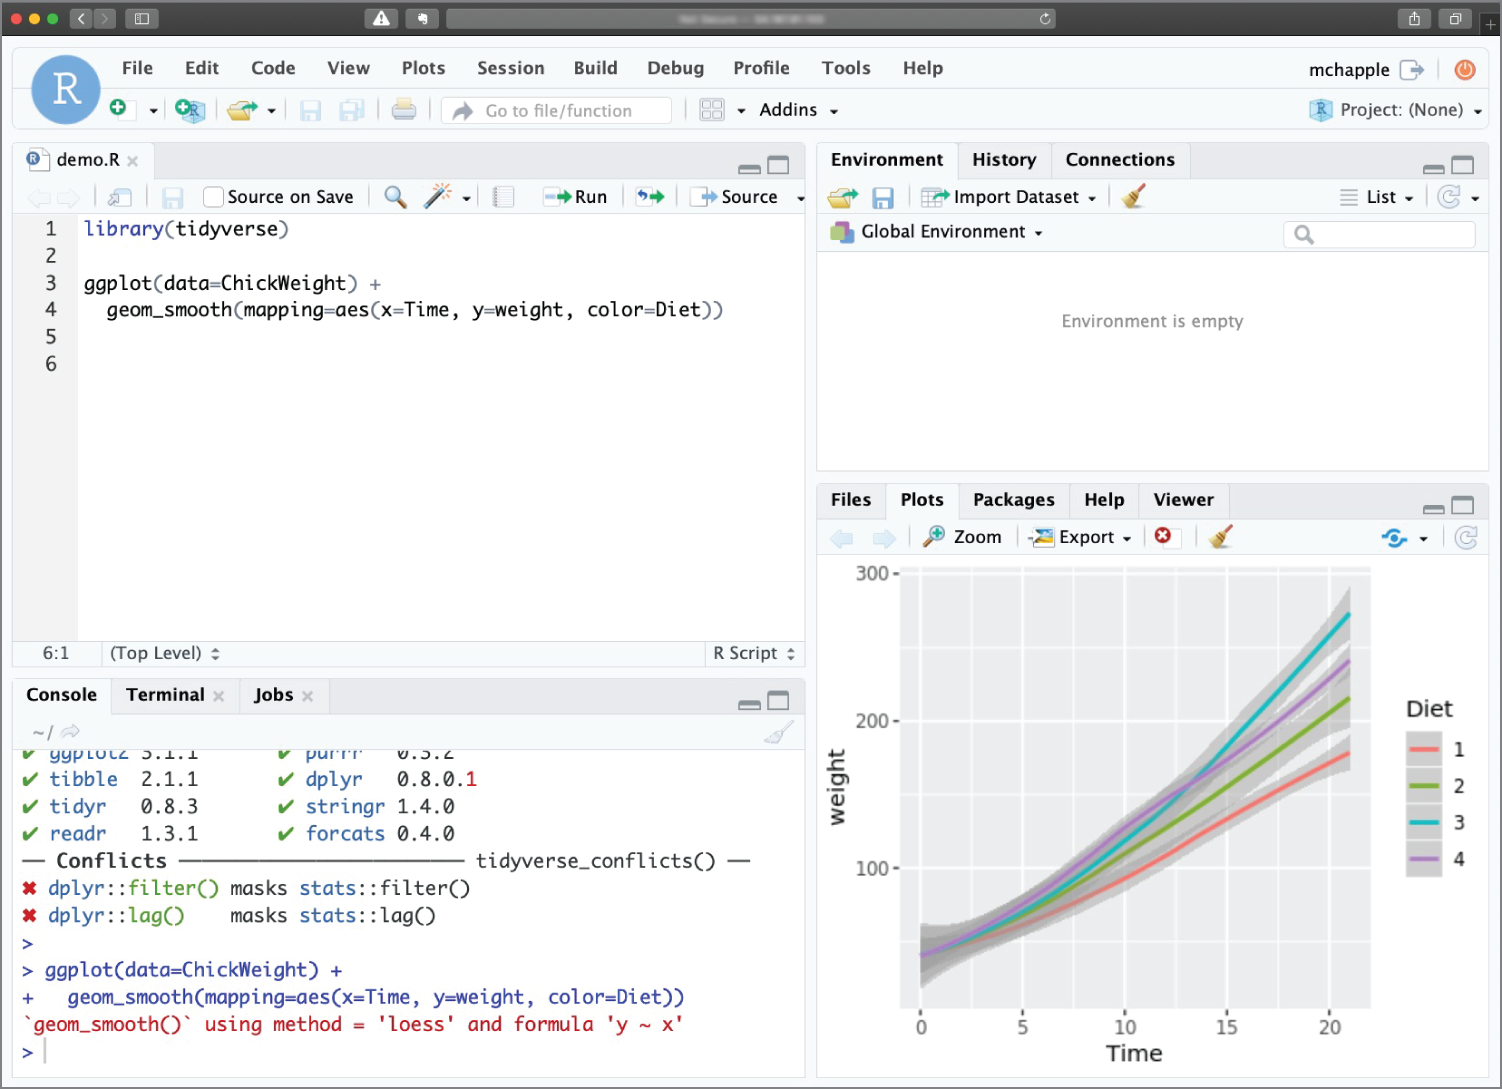 Snapshot of the RStudio Server providing a web-based IDE for collaborative use.